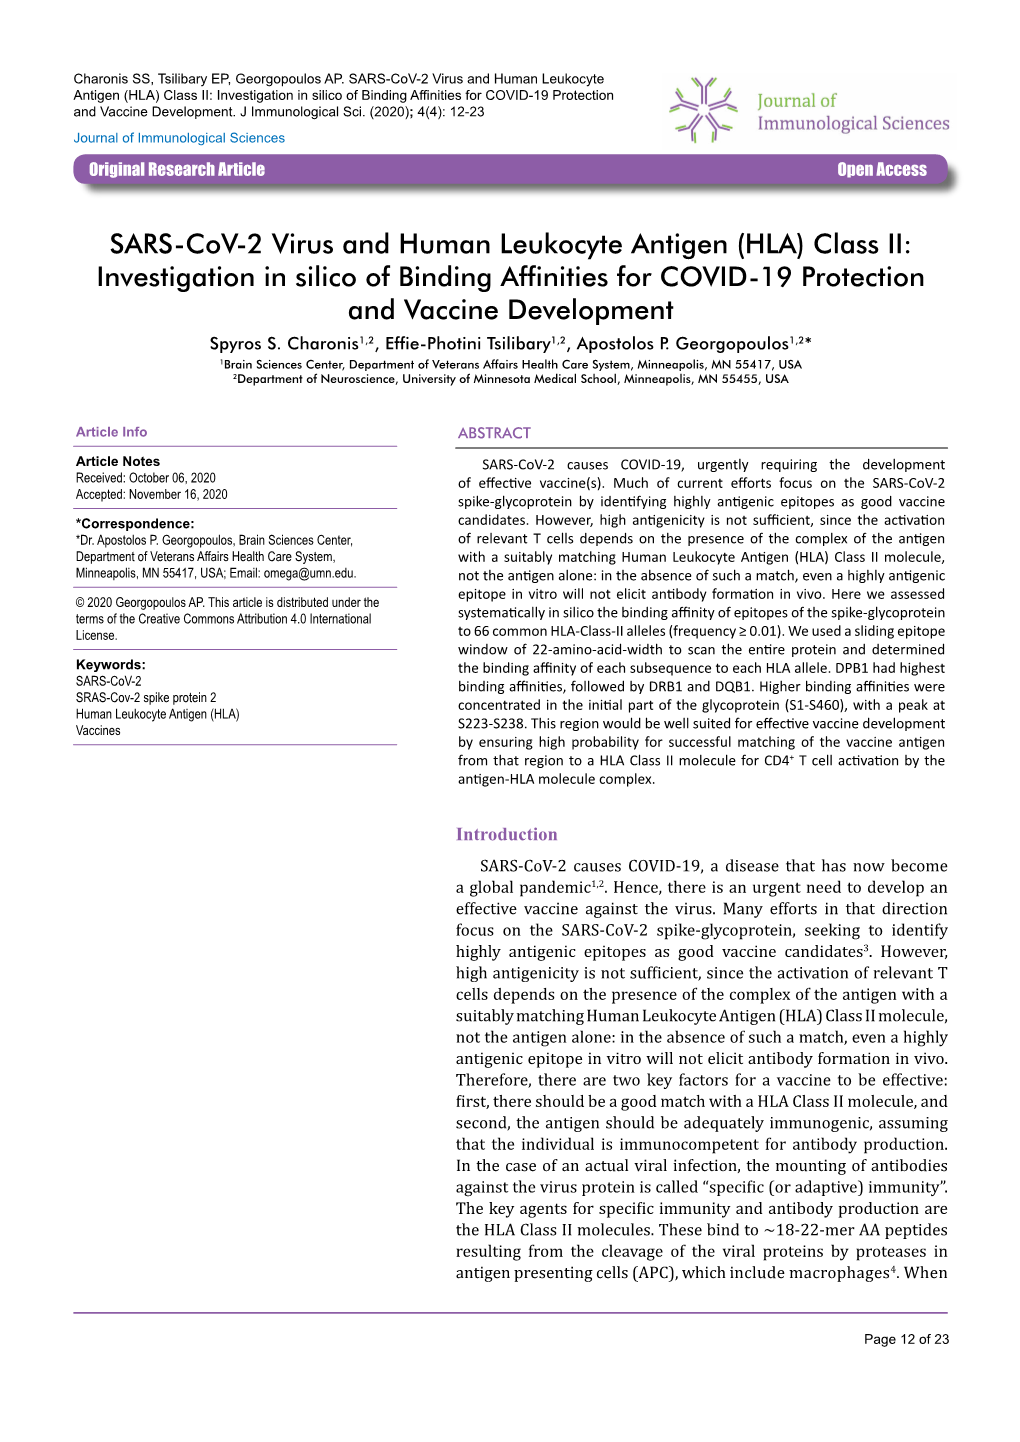 SARS-Cov-2 Virus and Human Leukocyte Antigen (HLA) Class II: Investigation in Silico of Binding Affinities for COVID-19 Protection and Vaccine Development